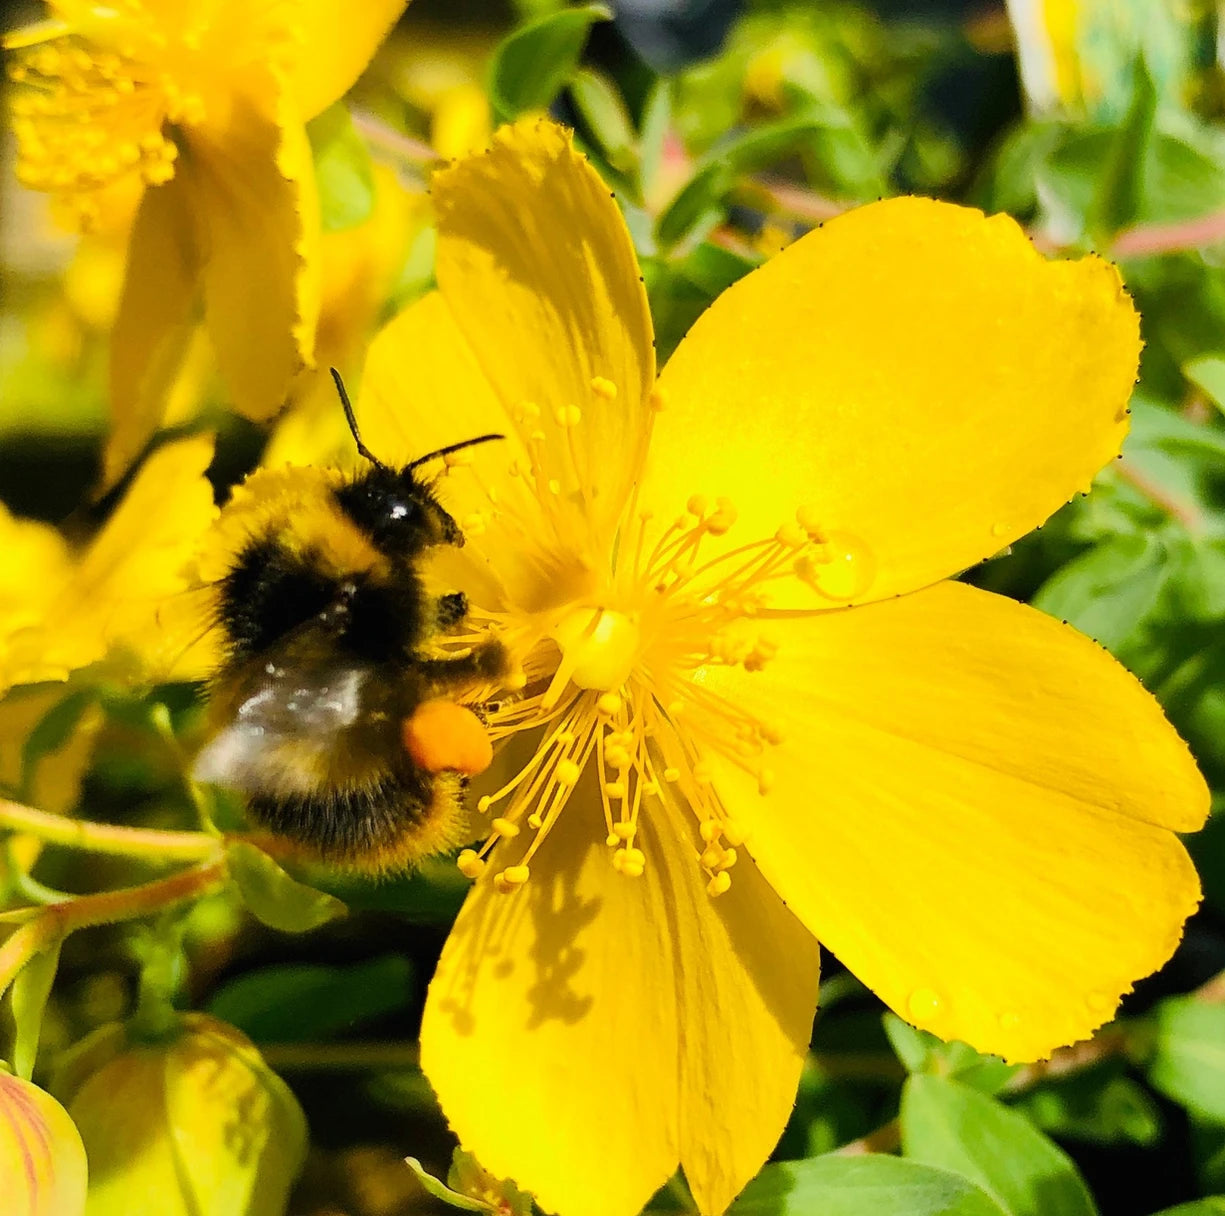 Bumble bee on a yellow flower